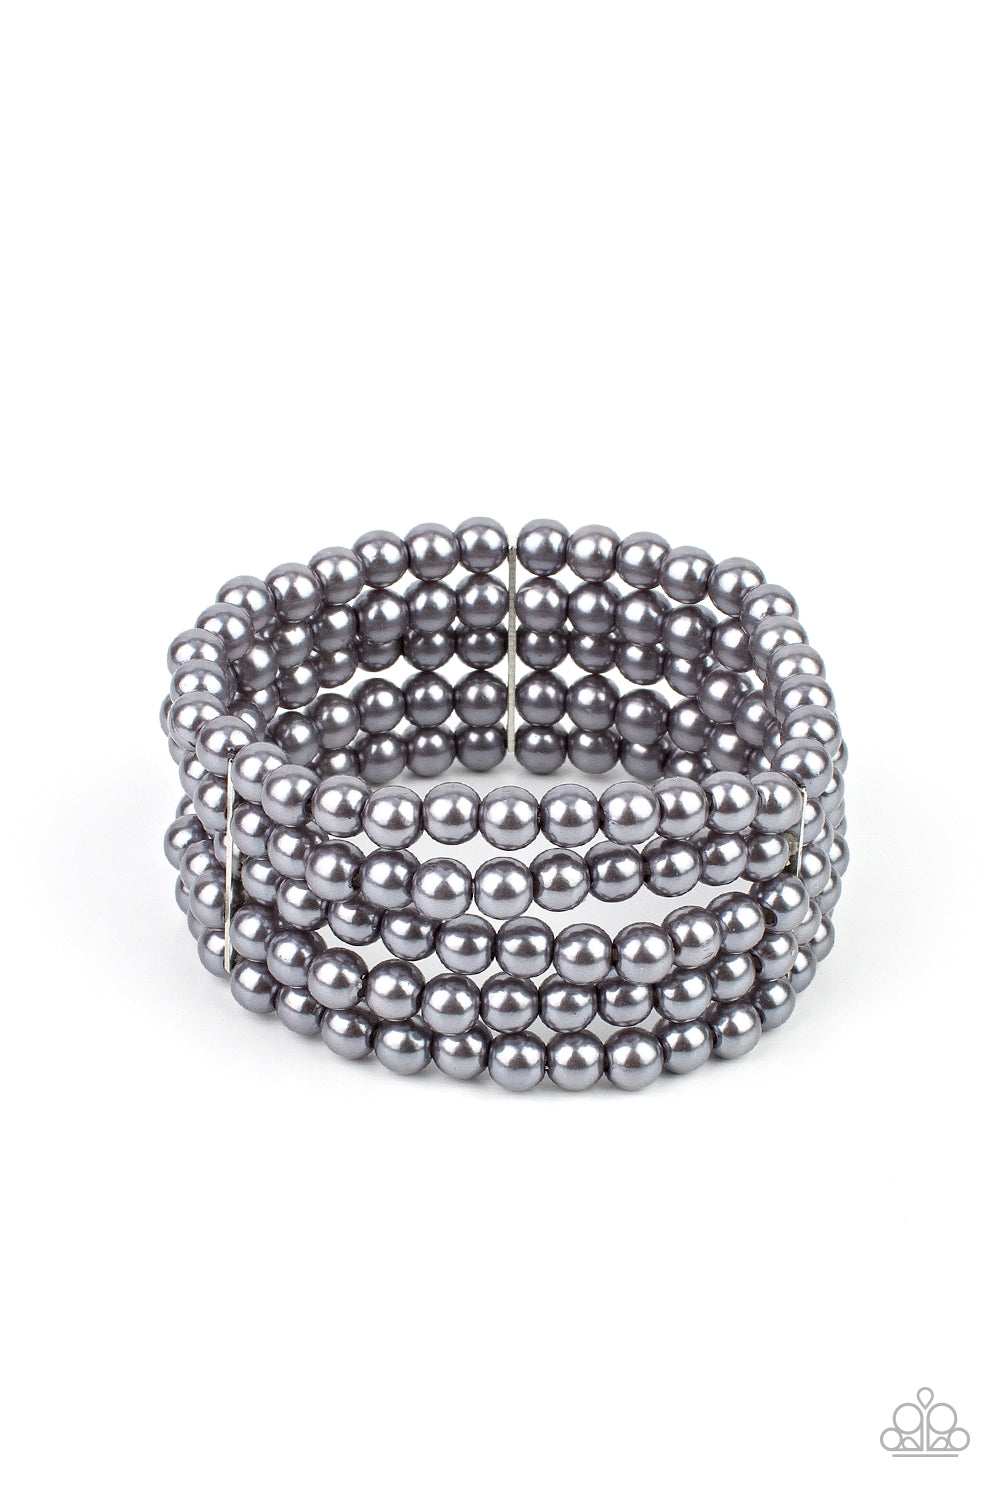 A Pearly Affair - Silver Grey Pearl Stretch Bracelets stacked layers of luminous grey pearl-like beads are threaded along stretchy bands creating a subtly indulgent allure around the wrist.  Sold as one individual bracelet.  Paparazzi Jewelry is lead and nickel free so it's perfect for sensitive skin too!